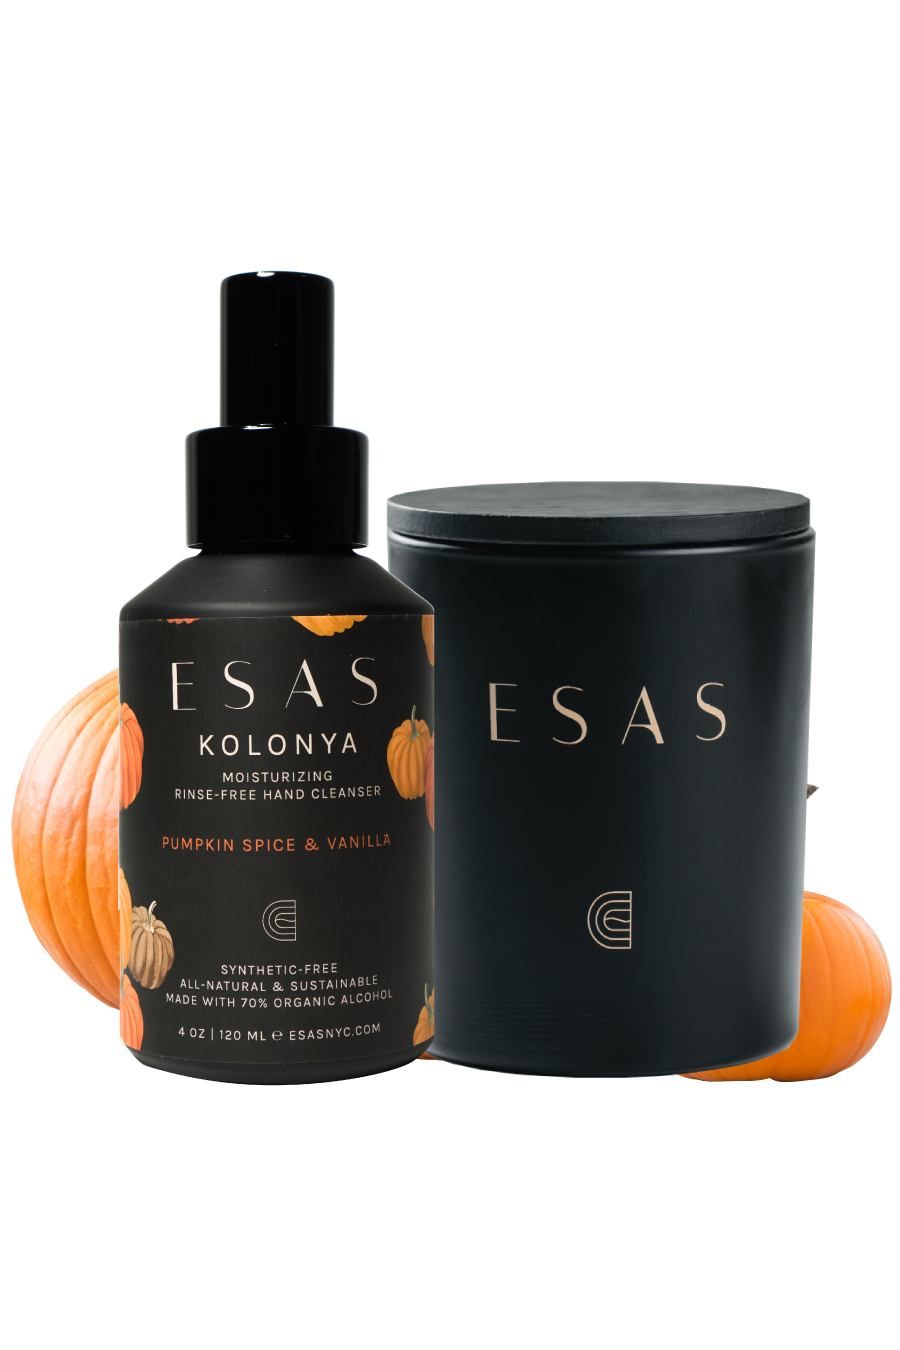 Pumpkin Spice & Vanilla Kolonya Hand Cleanser and Candle